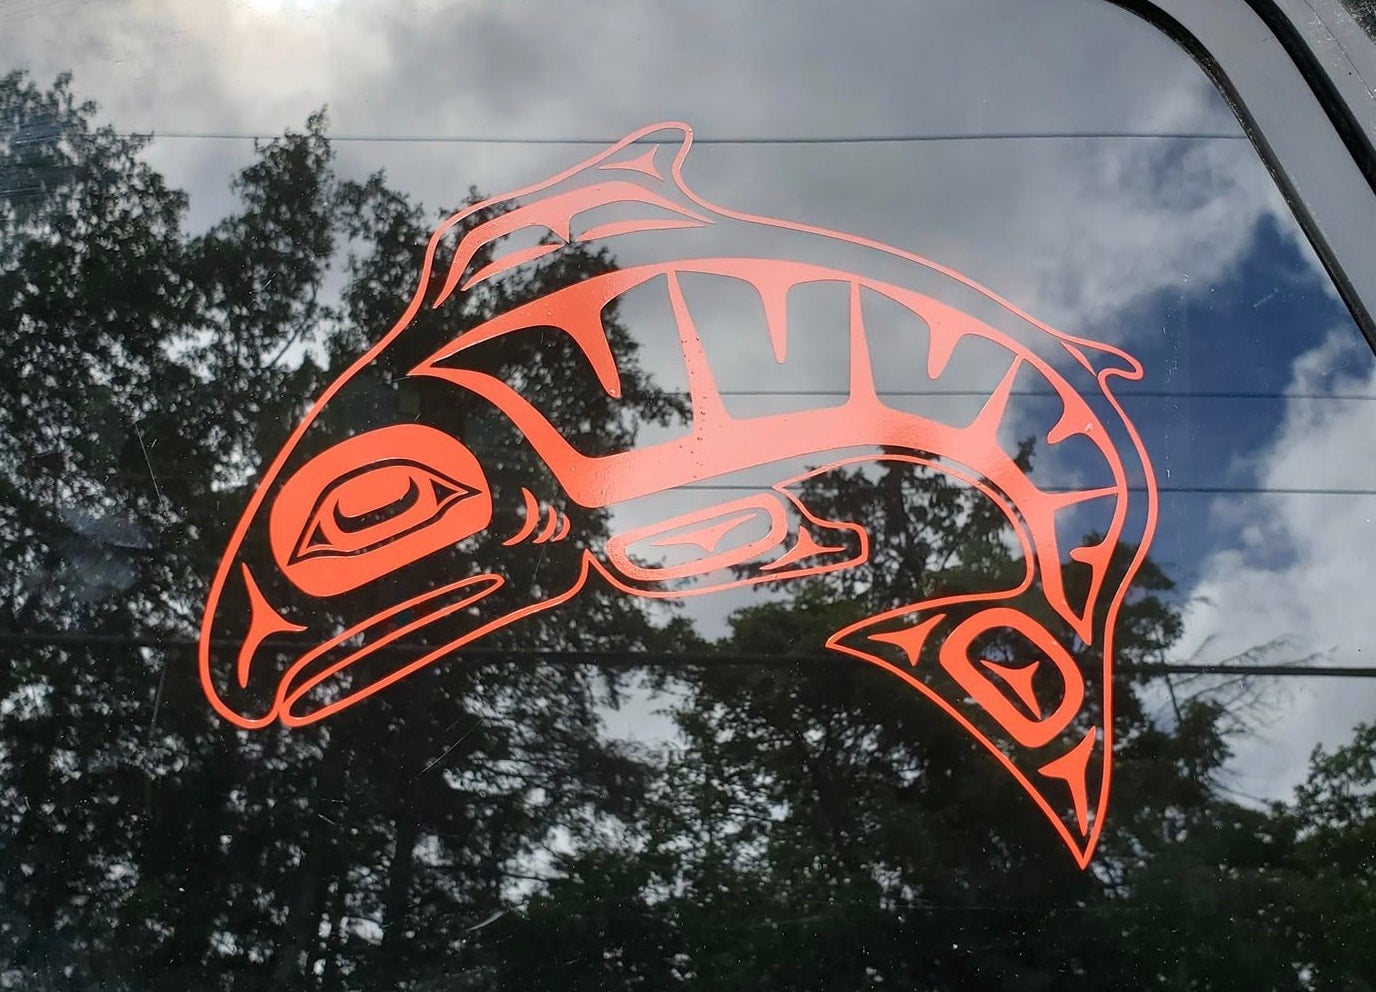 fishing decal, fishing decal Suppliers and Manufacturers at